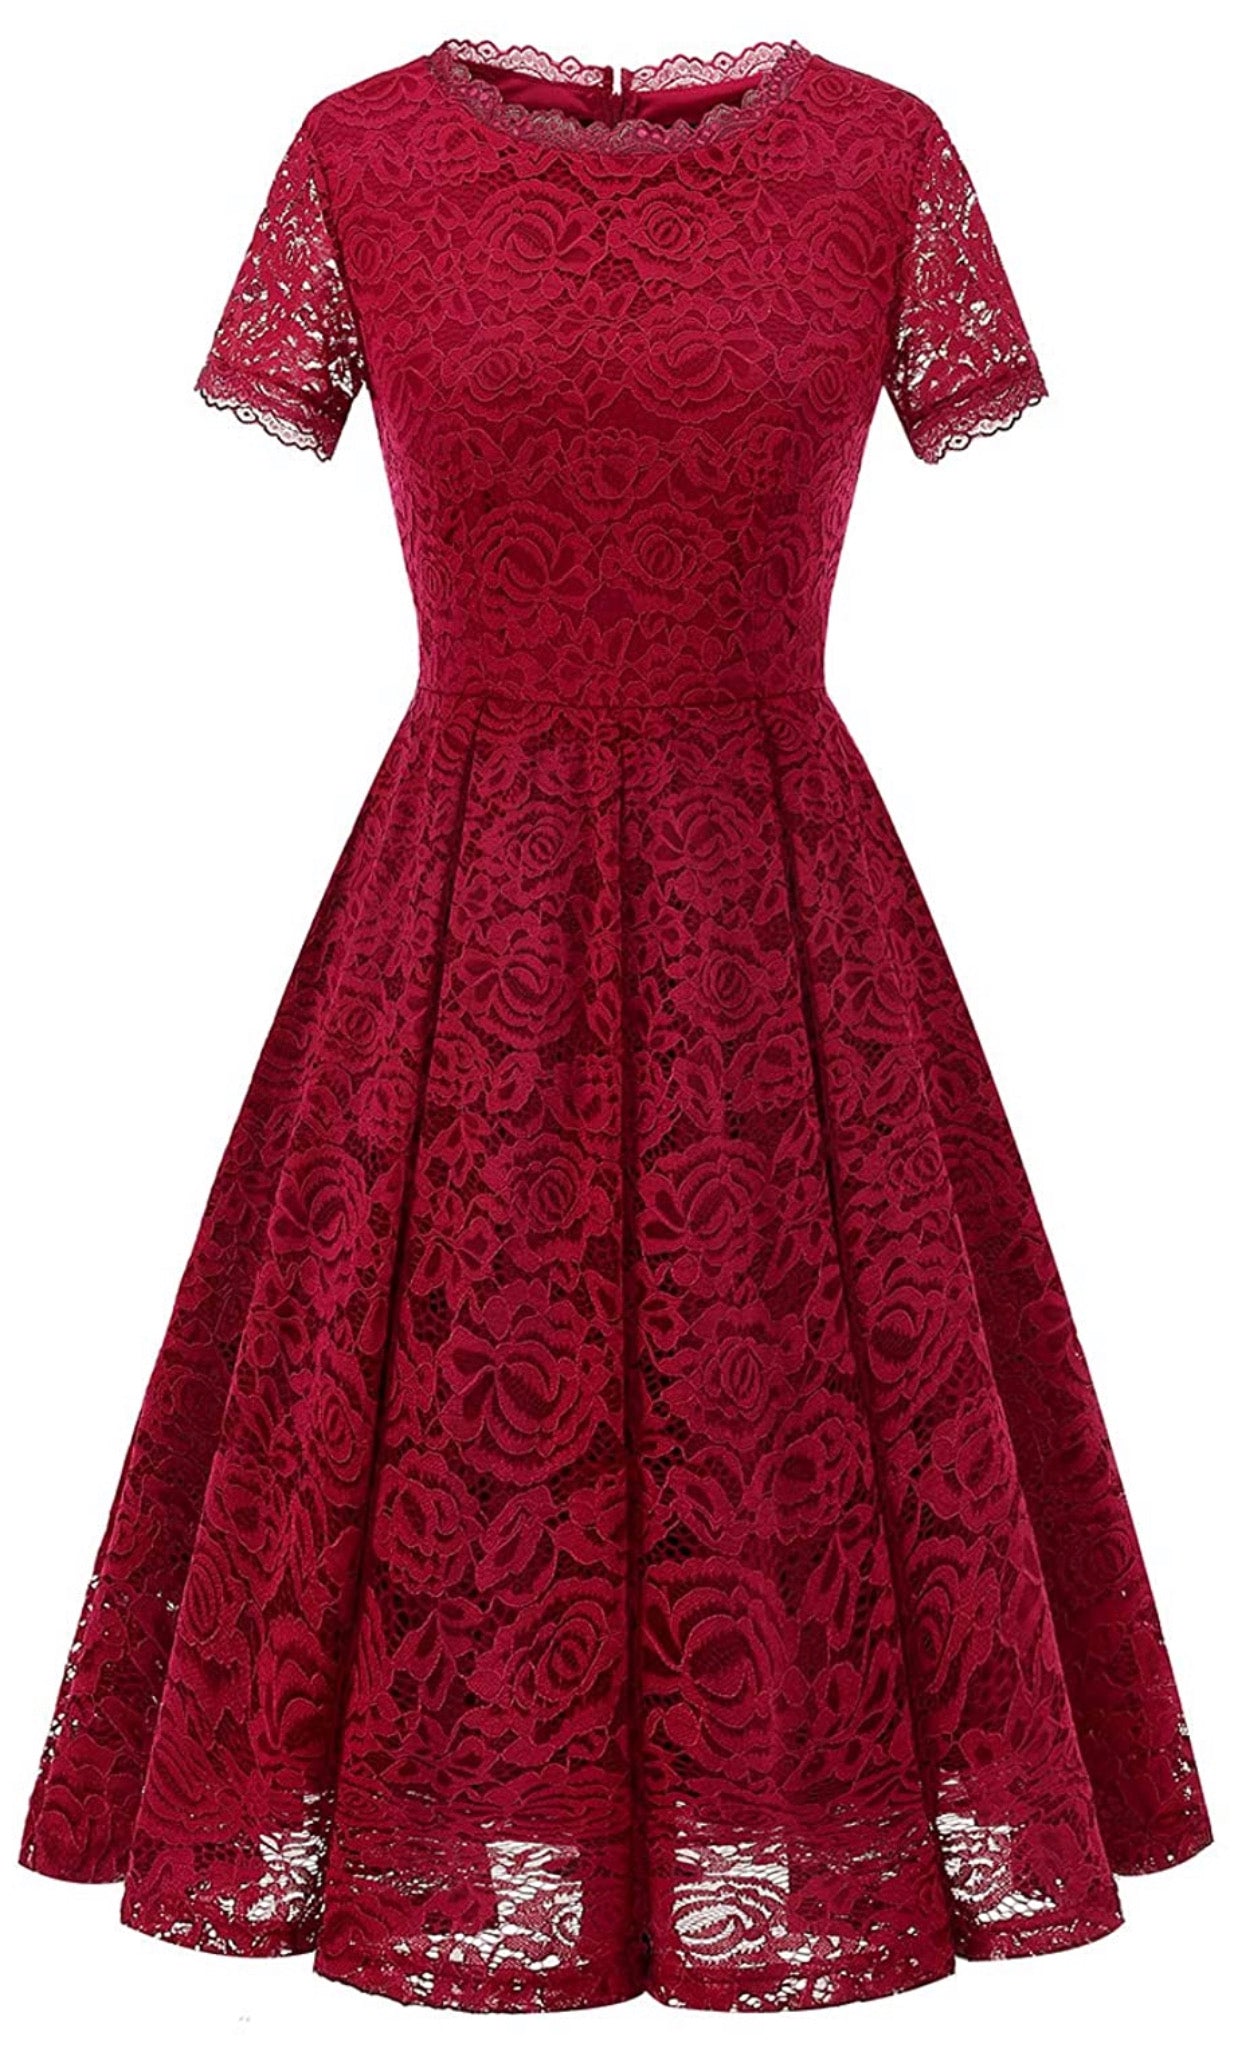 Short Burgundy Dress With Sleeves. Bridesmaid Lace Dress Knee